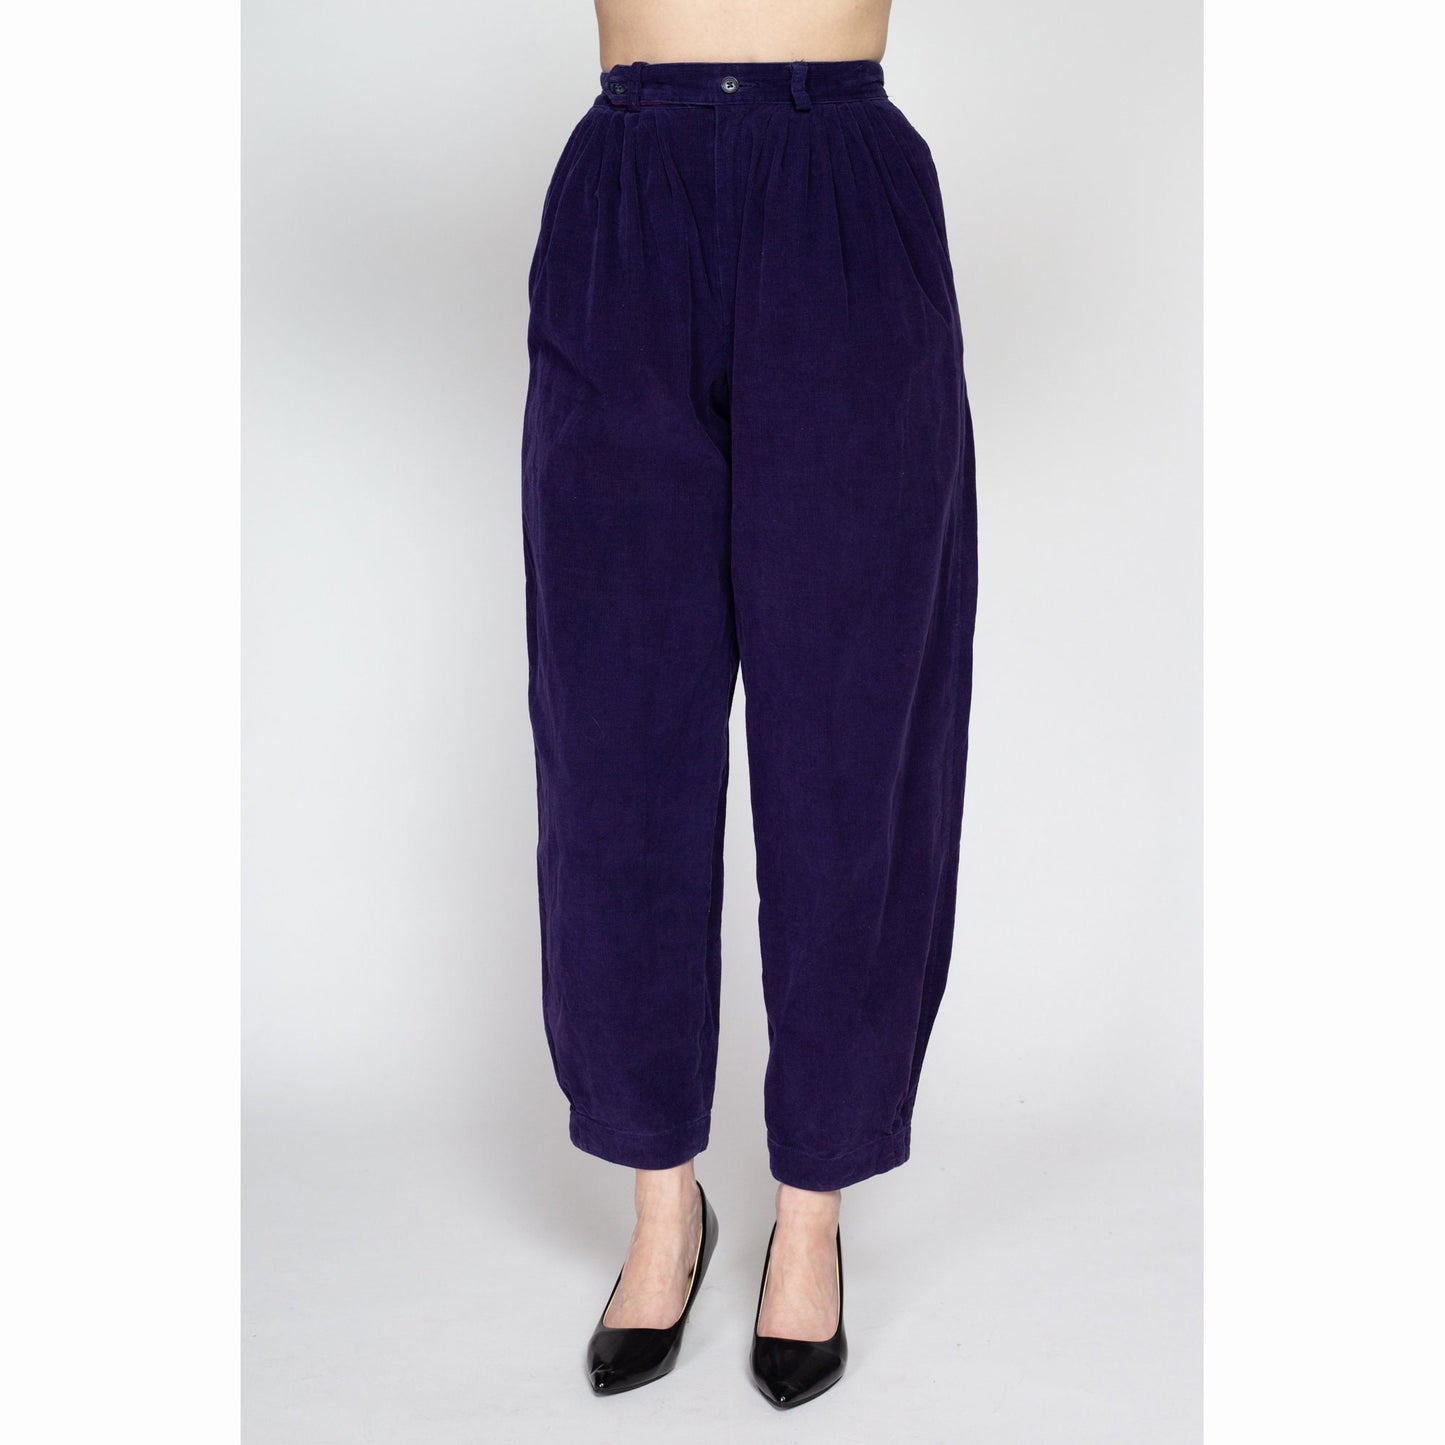 Small 80s Liz Claiborne Purple Corduroy Balloon Pants 26" | Vintage Pleated High Waisted Tapered Leg Trousers